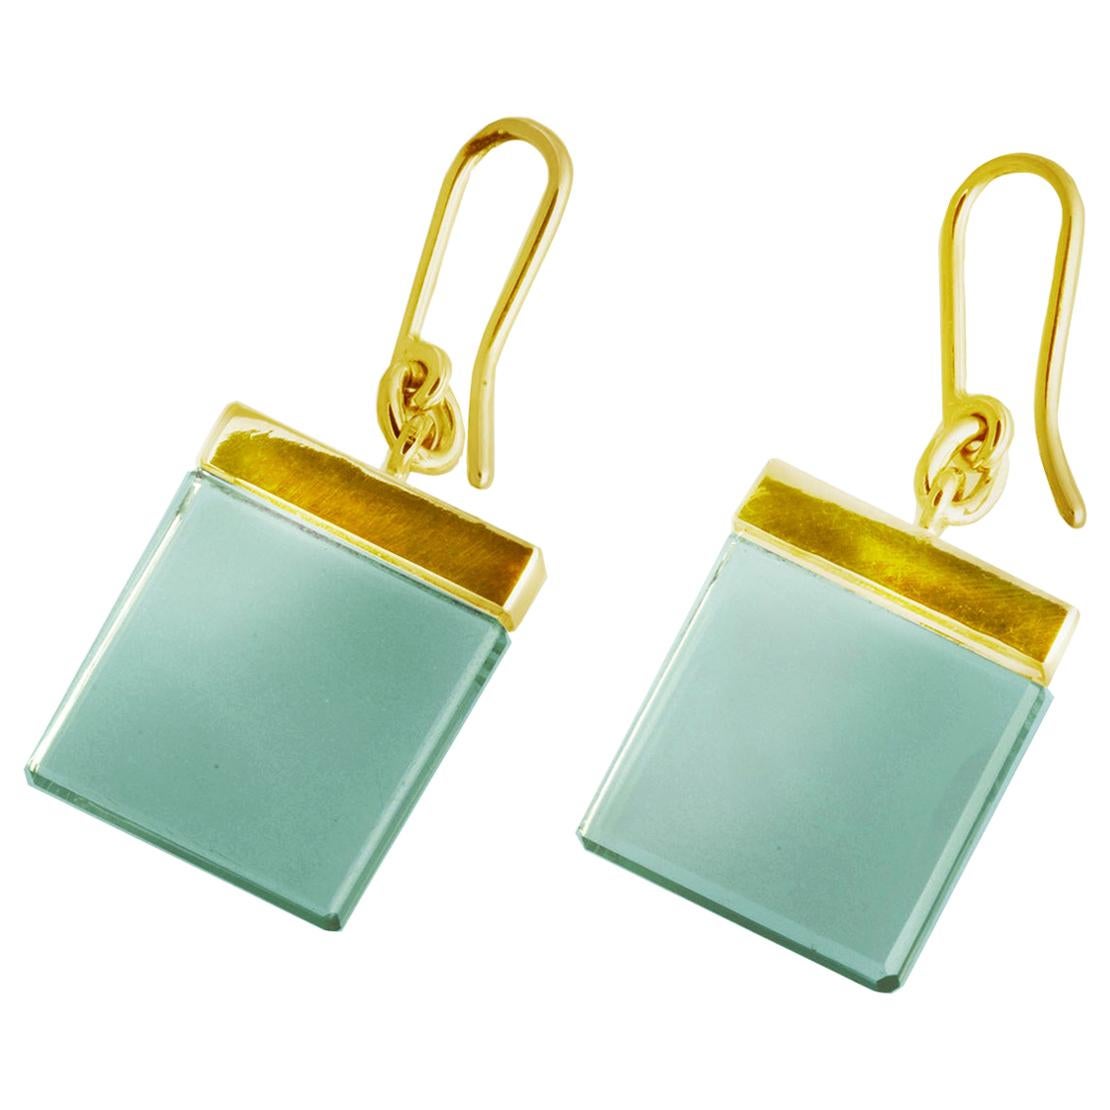 Yellow Gold-Plated Sterling Silver Contemporary Earrings with Green Quartzes